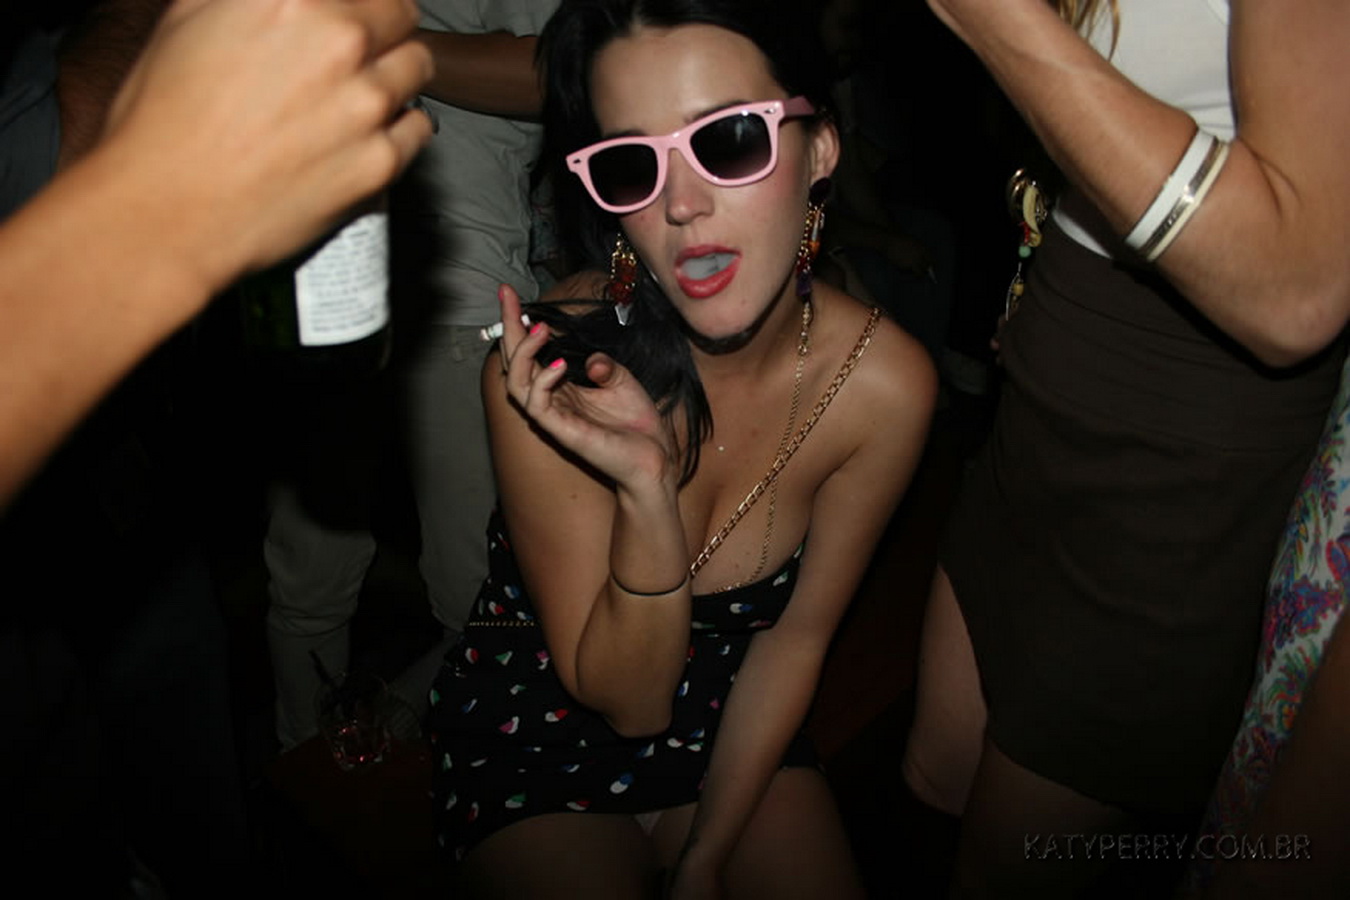 Katy_Perry_bobsslip_drunk_cleavage_downblouse_upskirt_nipslip_at_her_birthday_2007_party_99x_HQ_35.jpg